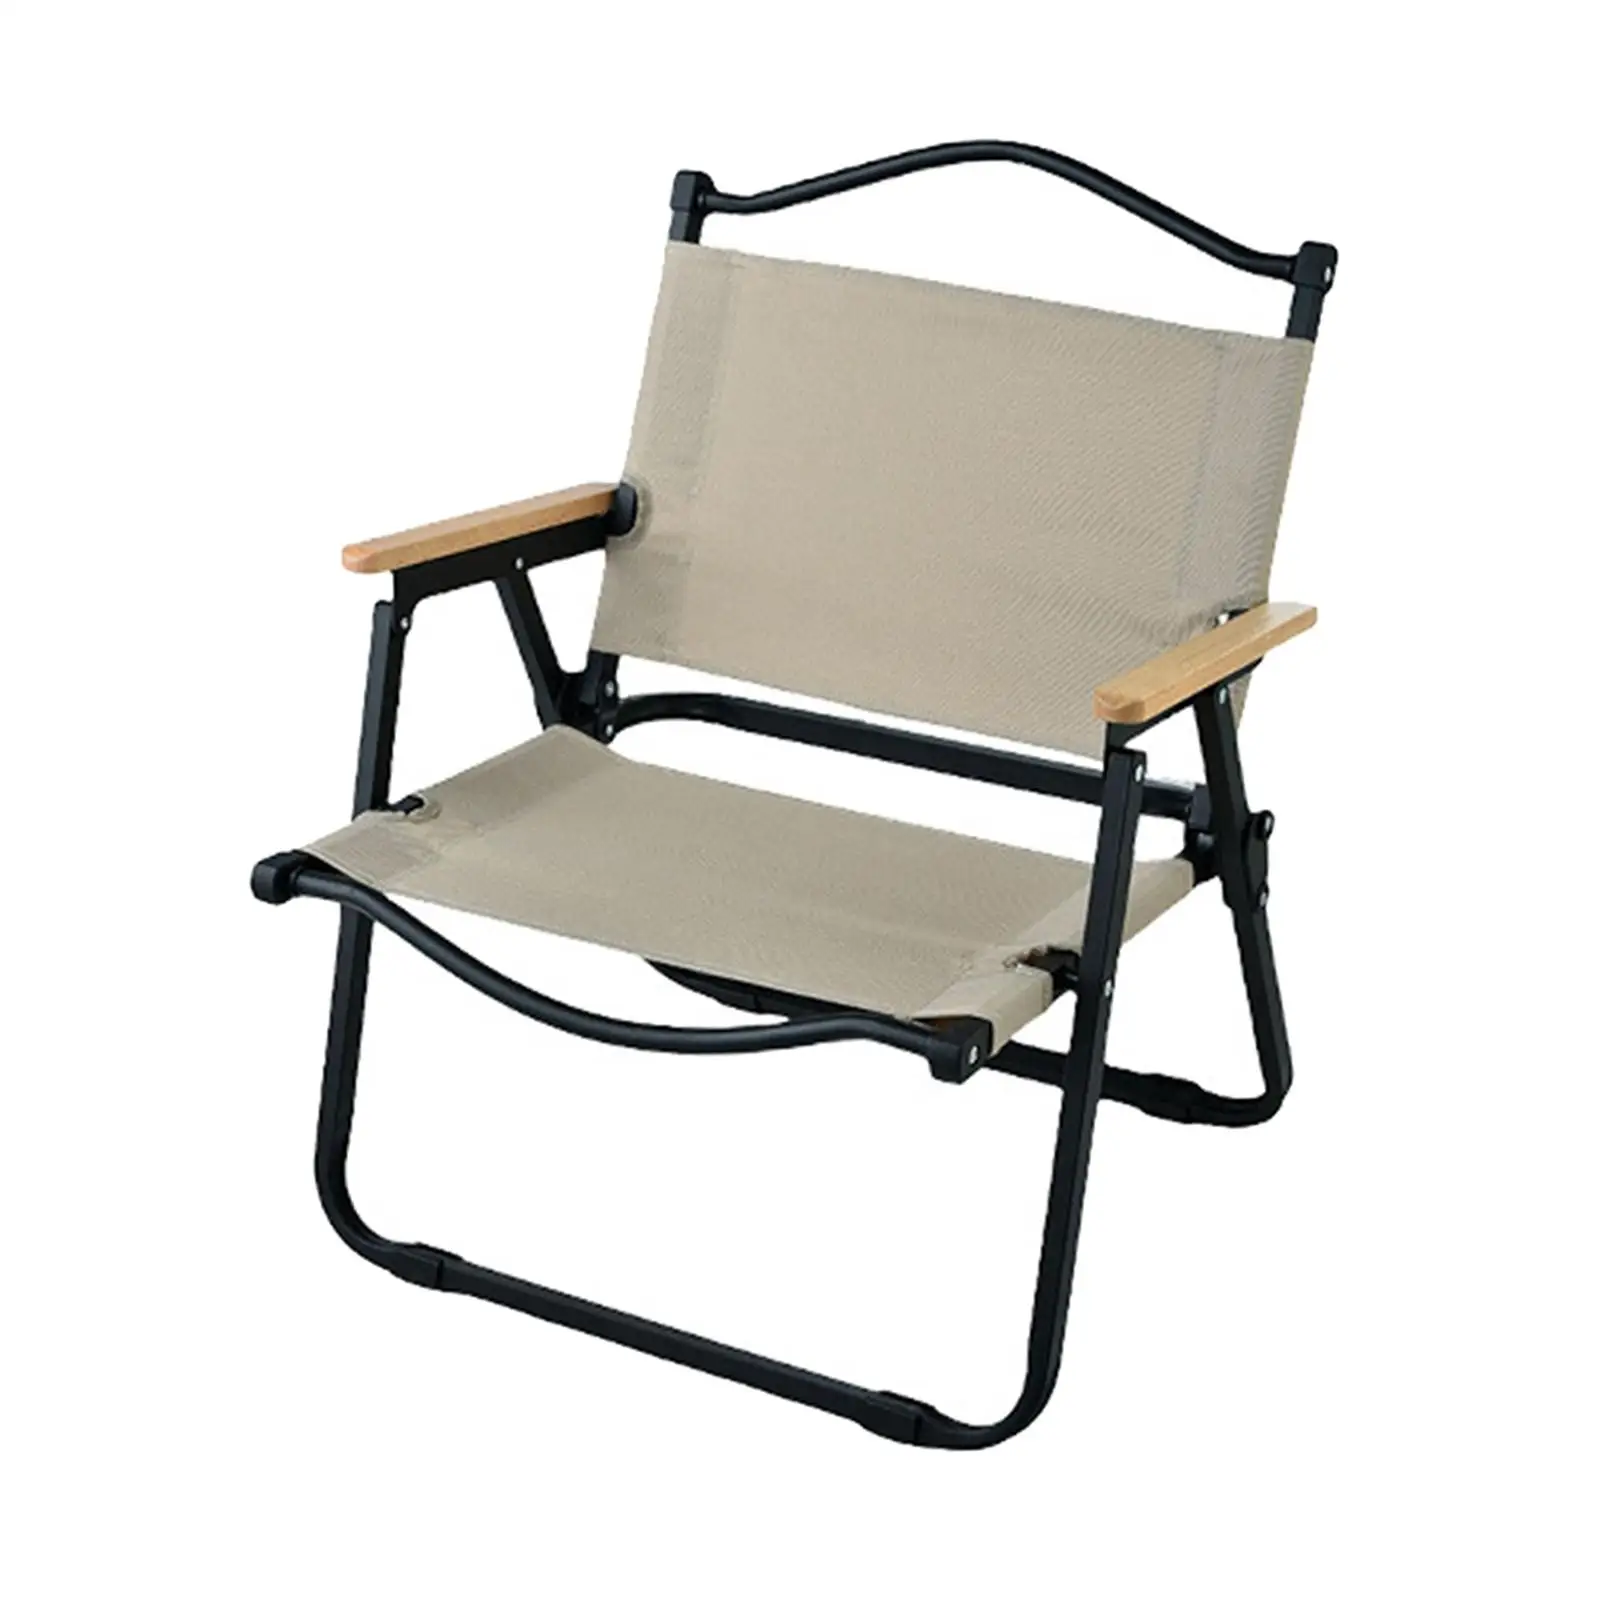 Camping Folding Chair Holds 330lbs Heavy Duty Outdoor Furniture for Lawn Beach